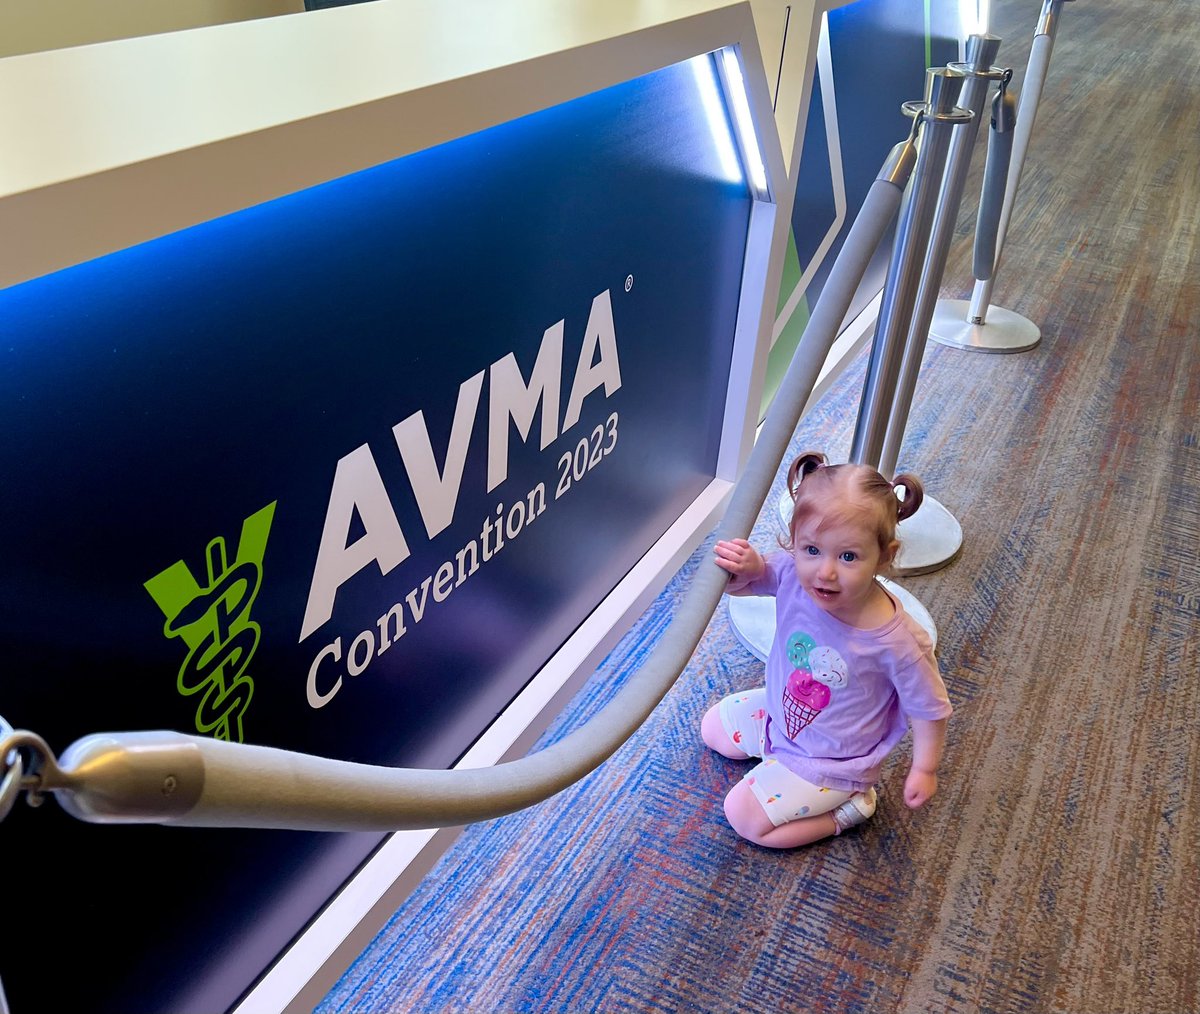 #AVMA2023 is officially underway! It’s never too early to start advocating on behalf of the profession.